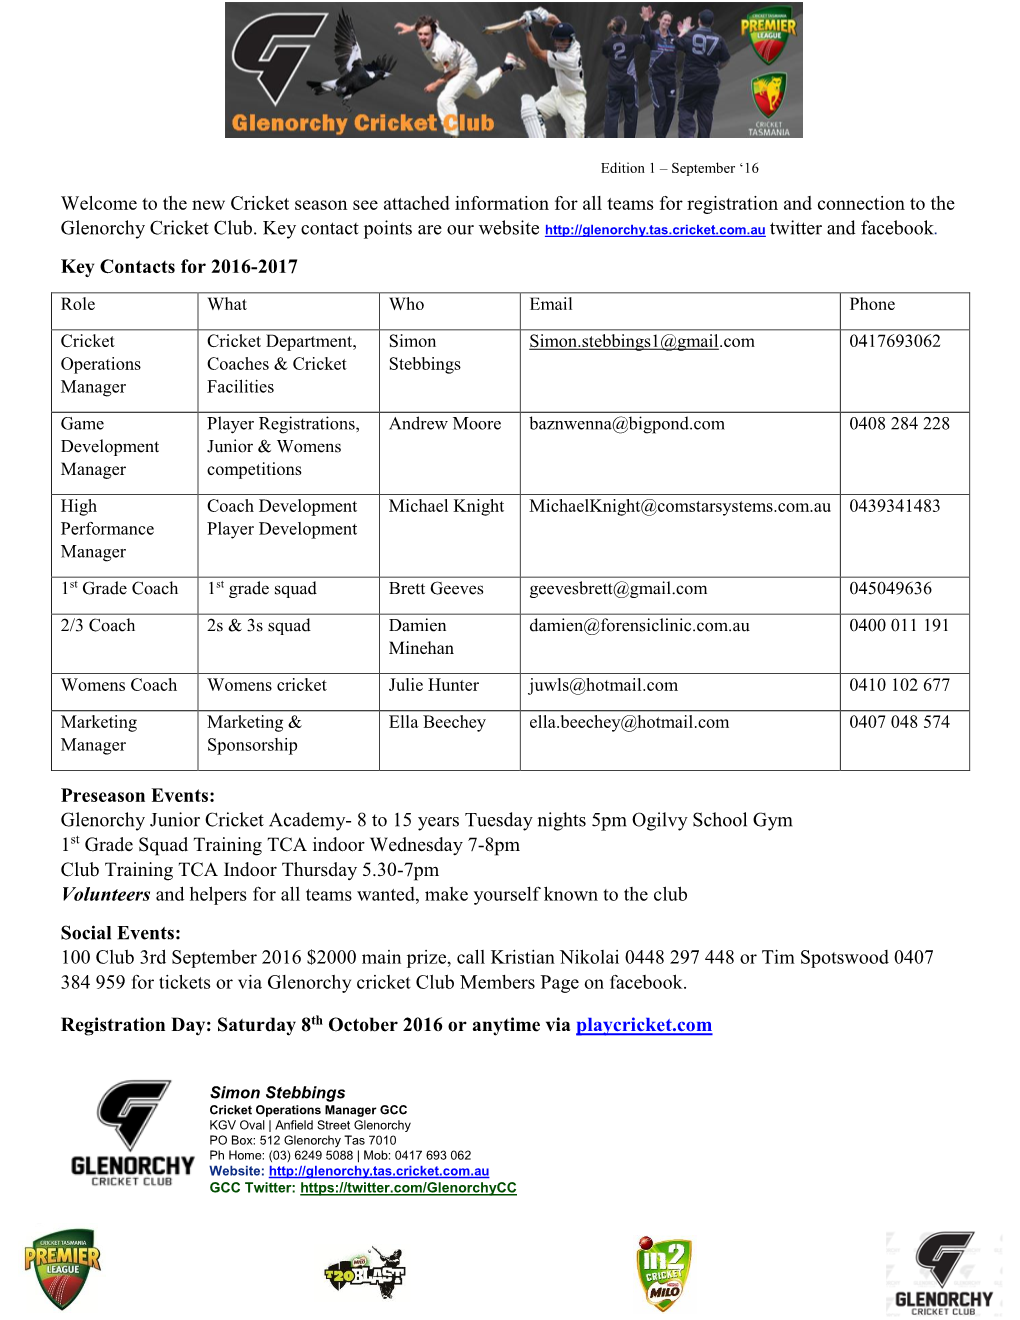 Welcome to the New Cricket Season See Attached Information for All Teams for Registration and Connection to the Glenorchy Cricket Club